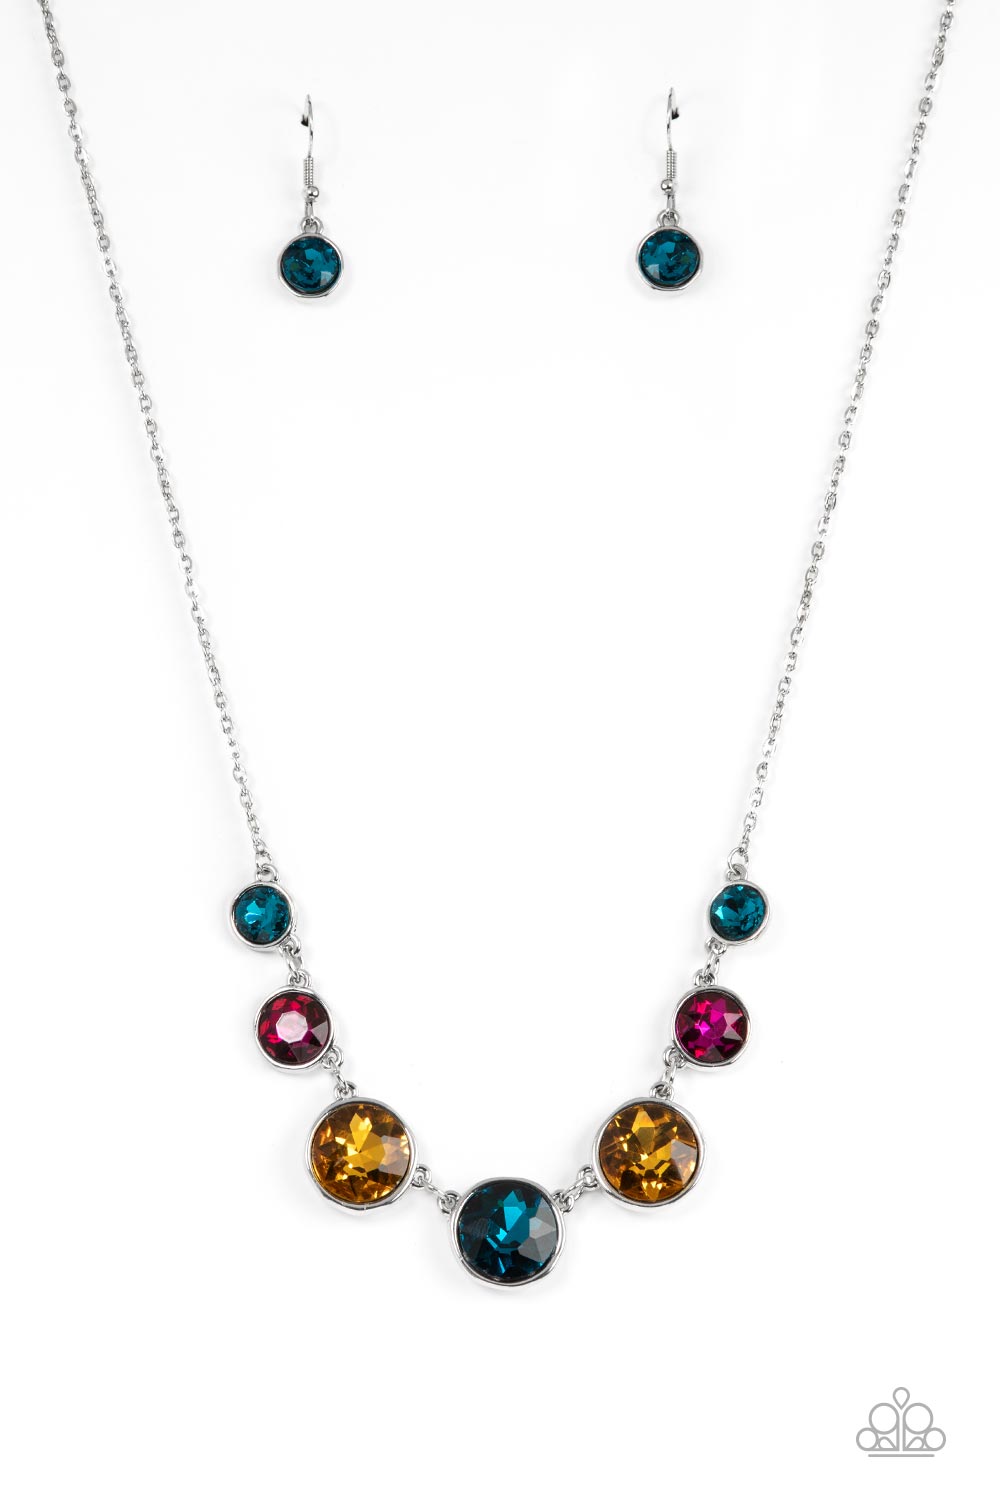 Pampered Powerhouse Multi Necklace - Paparazzi Accessories  Encased in shiny silver frames, a glitzy collection of blue, yellow, and pink rhinestones gradually increase in size as they link below the collar for a flawless finish. Features an adjustable clasp closure.  Sold as one individual necklace. Includes one pair of matching earrings.